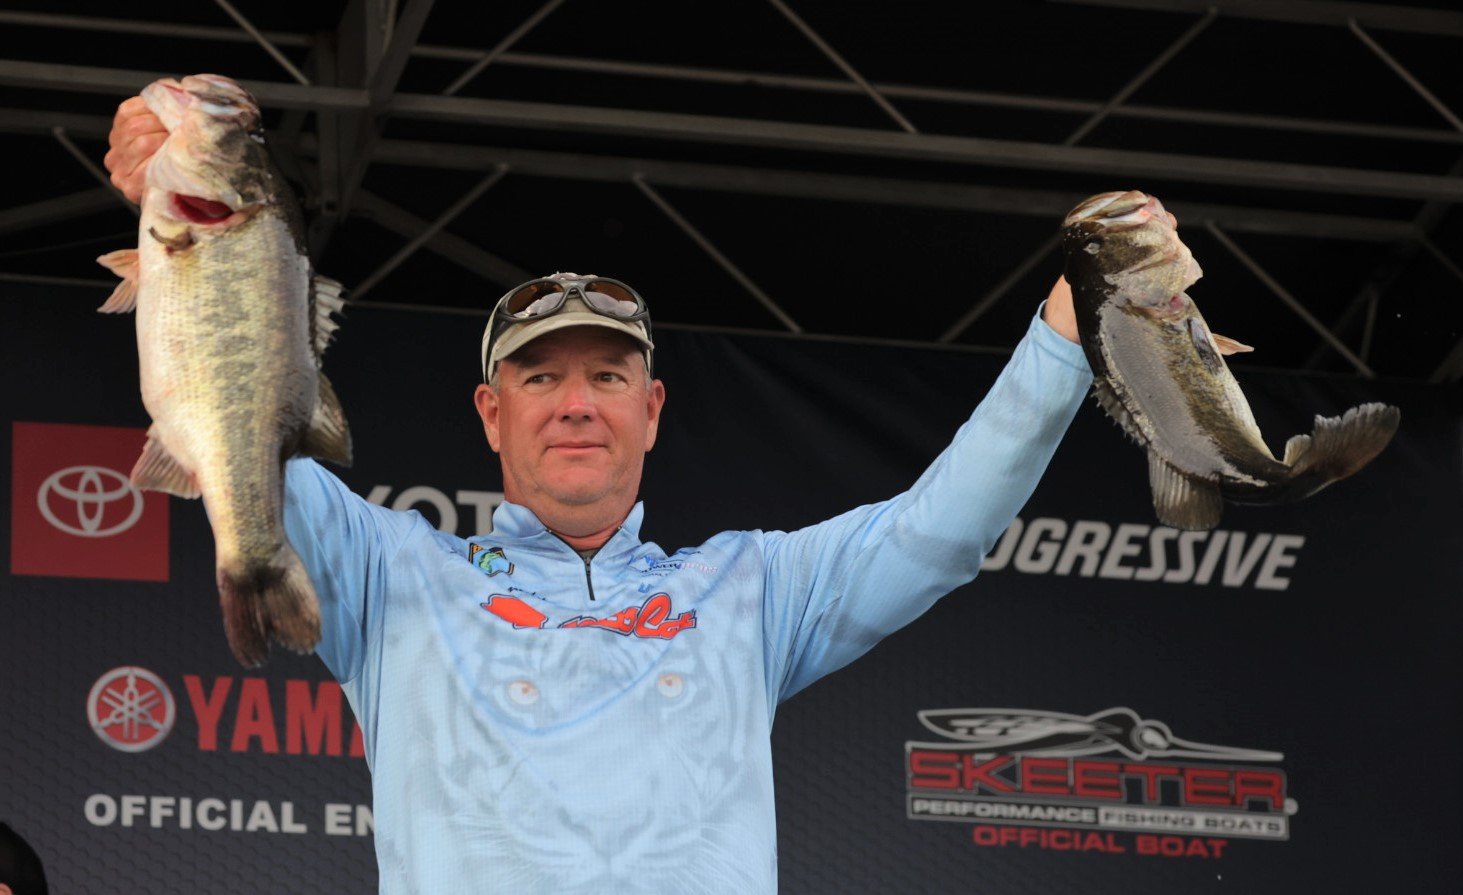 Steve Kennedy of Auburn, Ala., is leading after Day 3 of the 2023 SiteOne Bassmaster Elite at Lake Okeechobee with a three-day total of 70 pounds, 2 ounces.